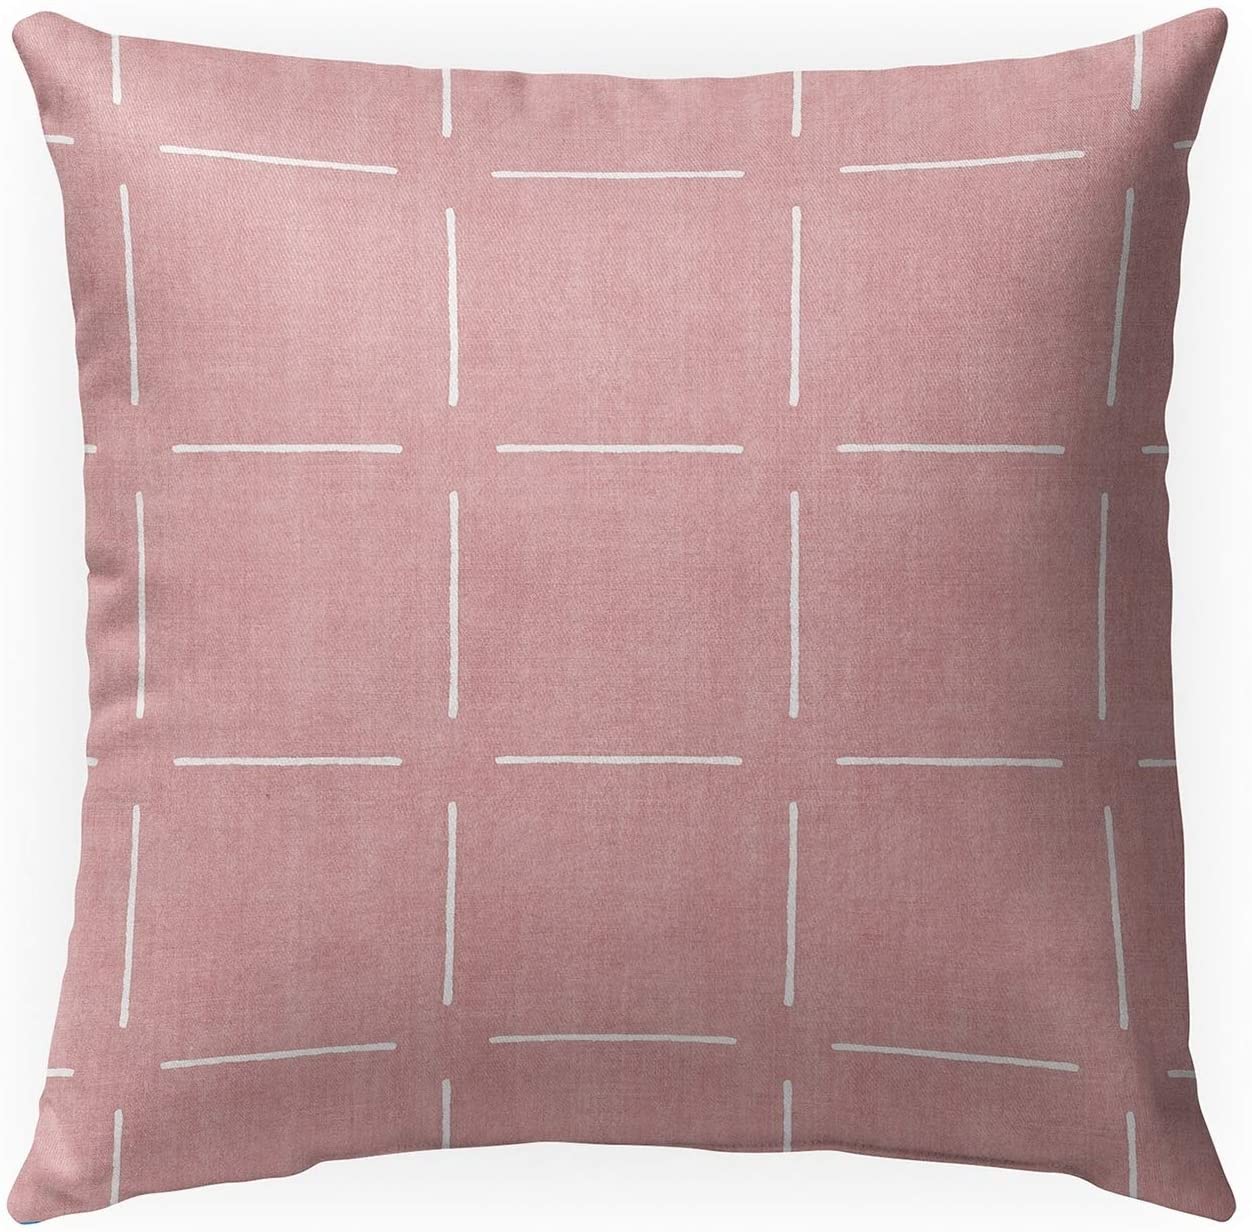 MISC Block Simple Squares Pink Indoor|Outdoor Pillow by 18x18 Pink Geometric Transitional Polyester Removable Cover